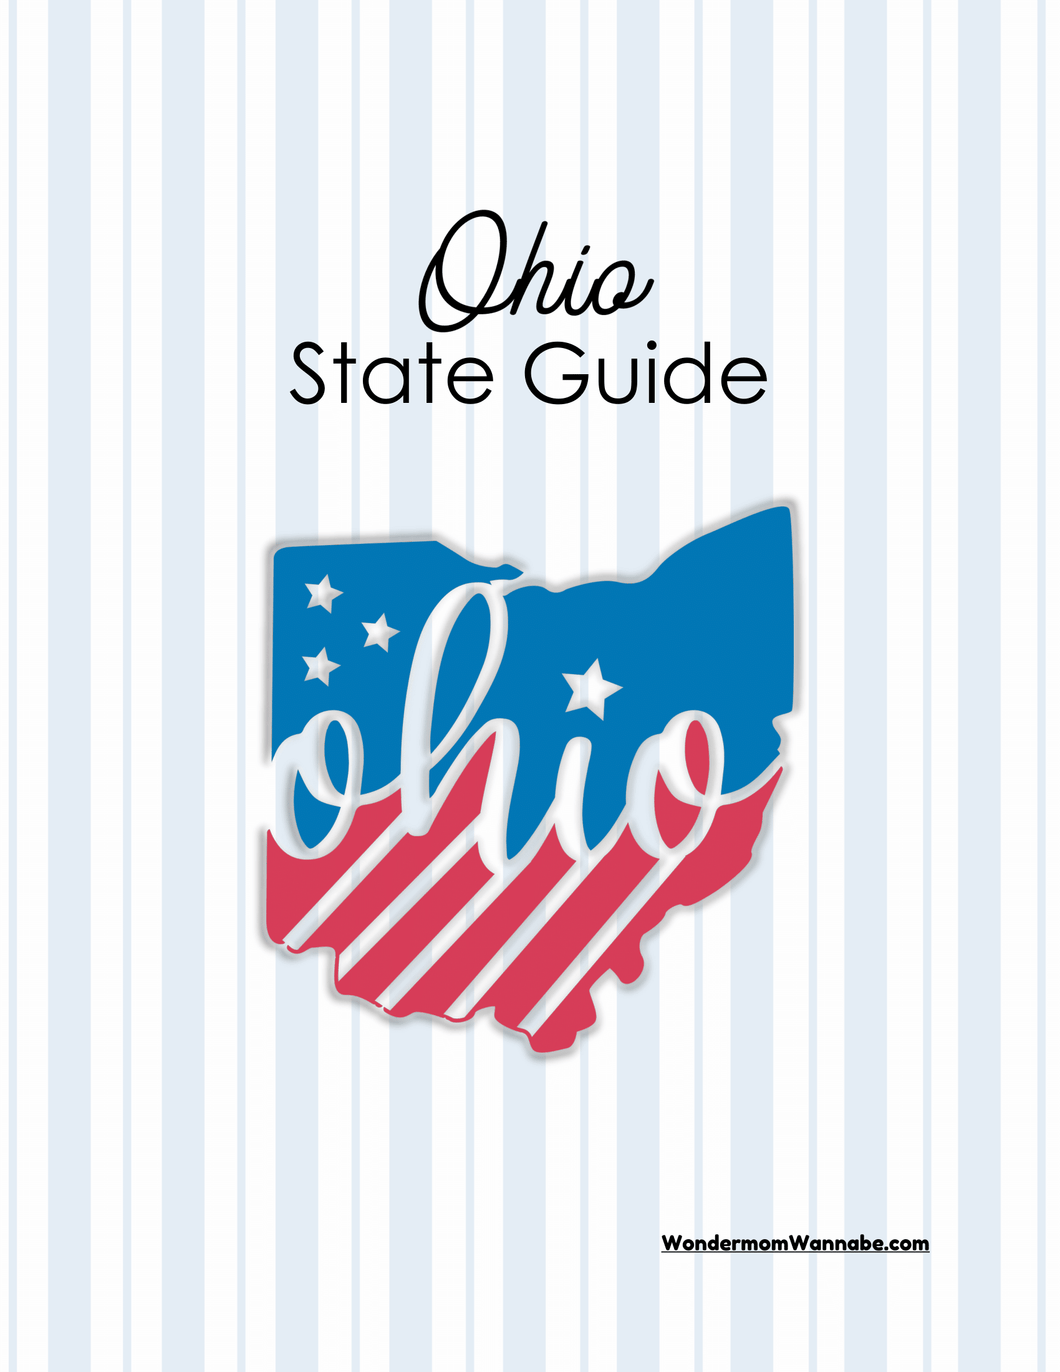 Ohio Travel Guide and Activity Kit for Kids